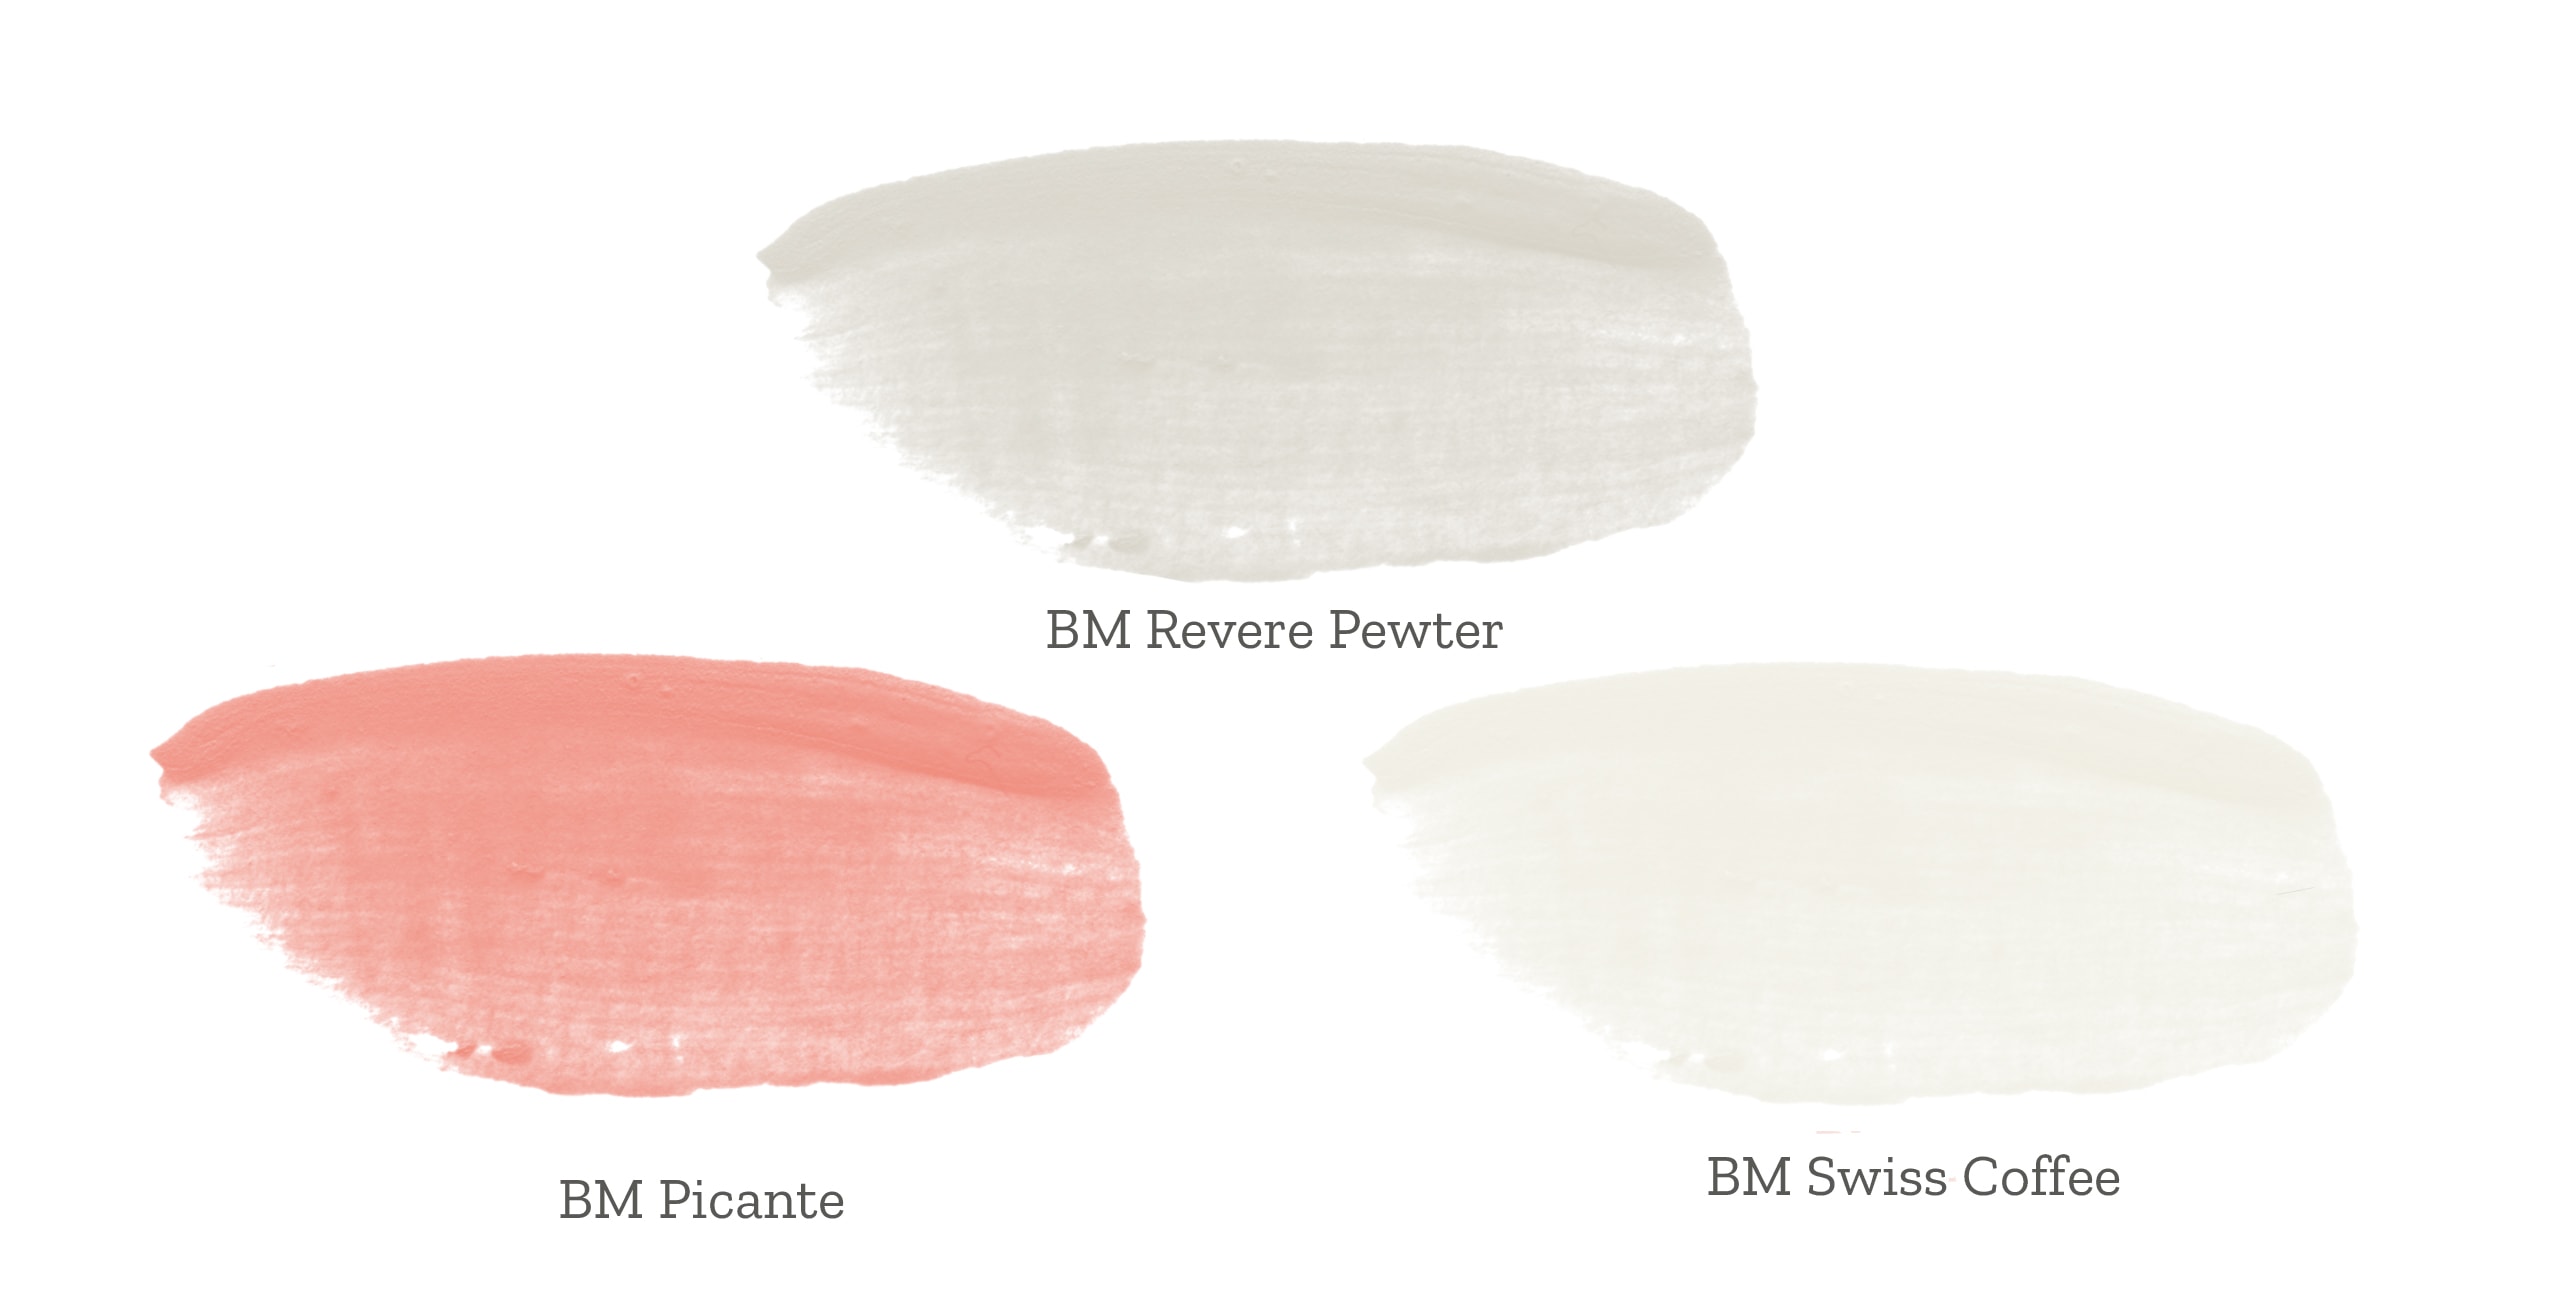 Benjamin Moore paint shades called Revere Pewter, Picante and Swiss Coffee